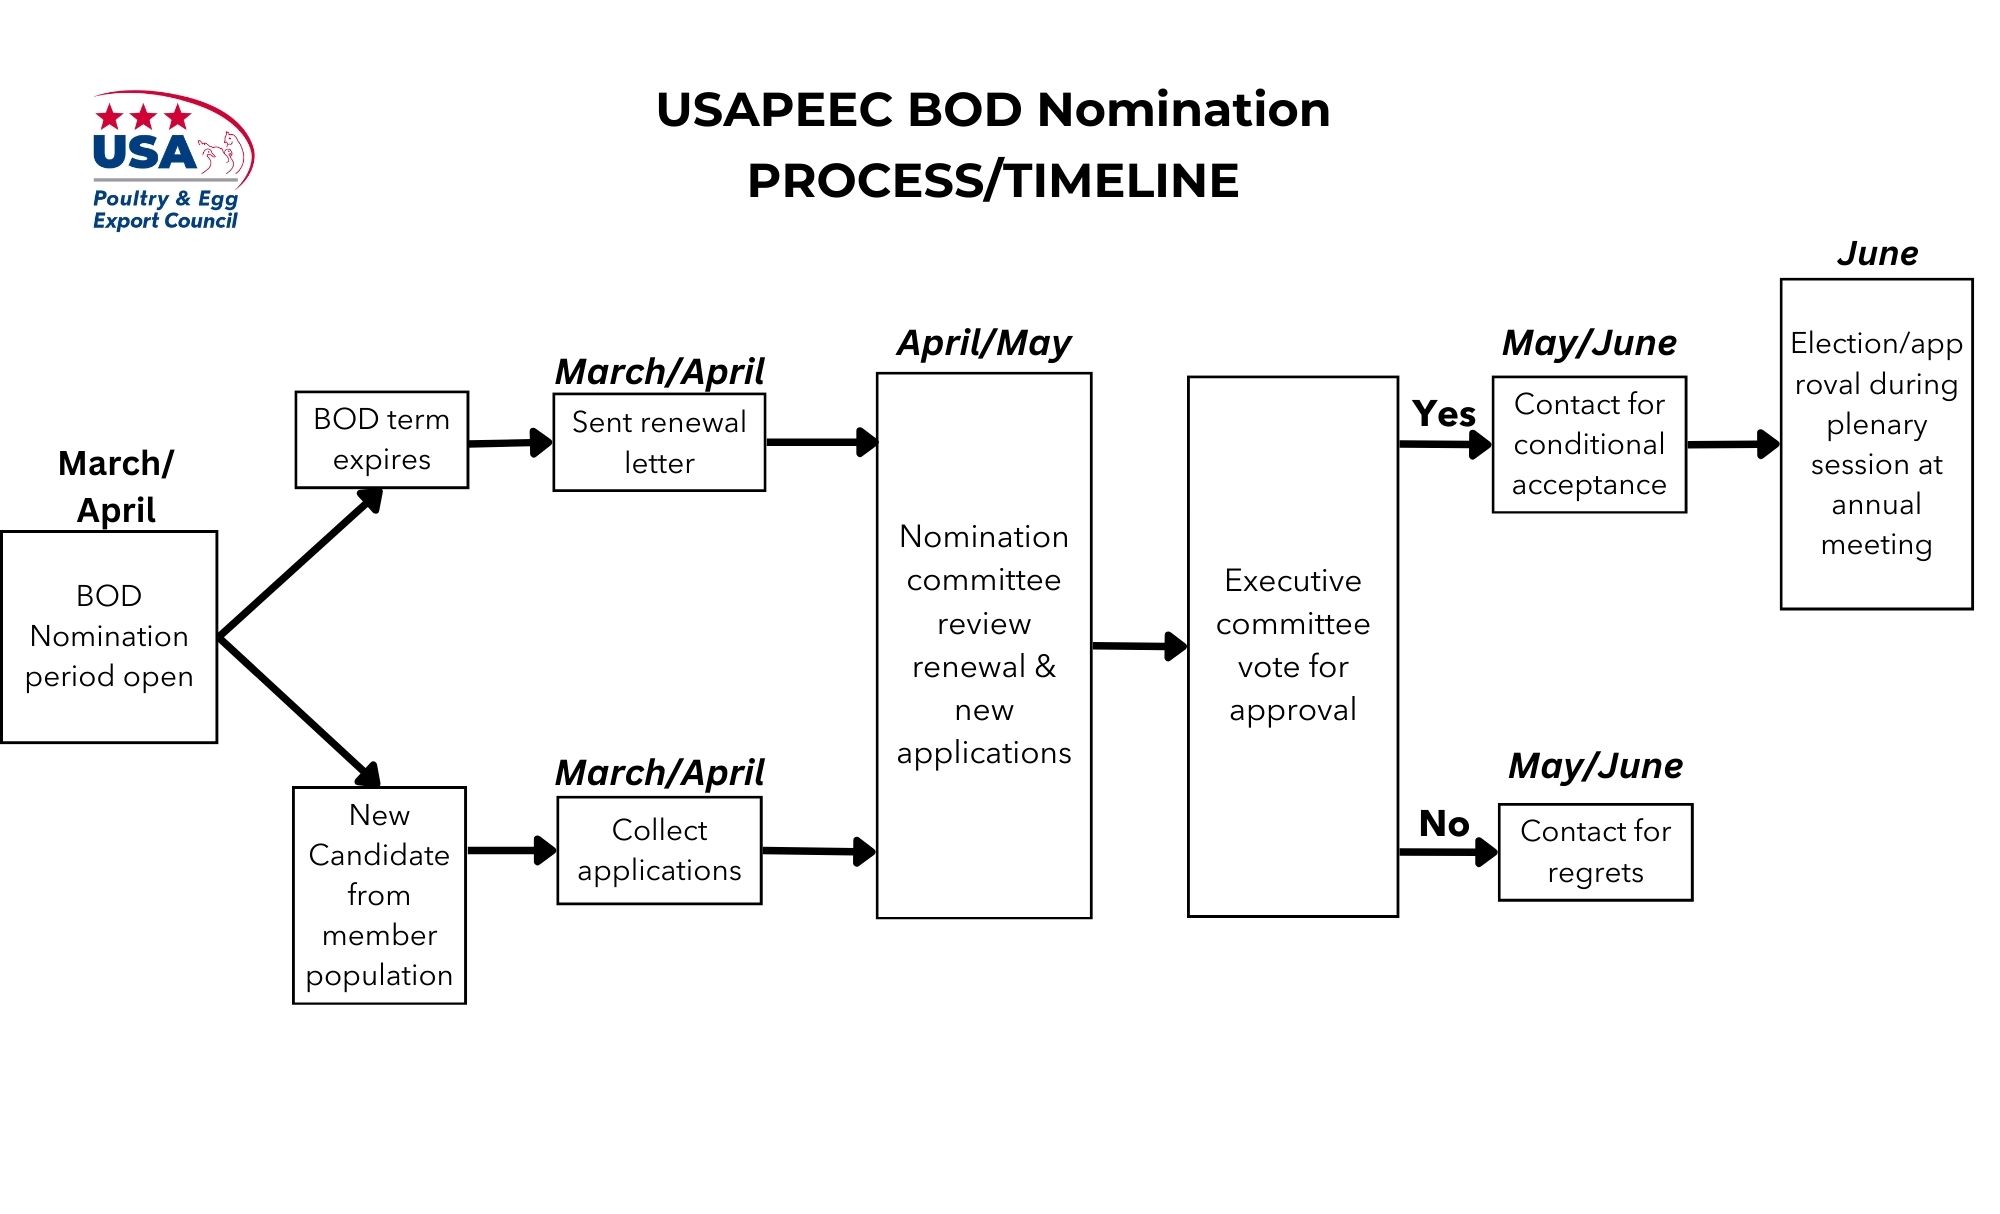 A flowchart indicating the process for electing a member to the Board of Directors